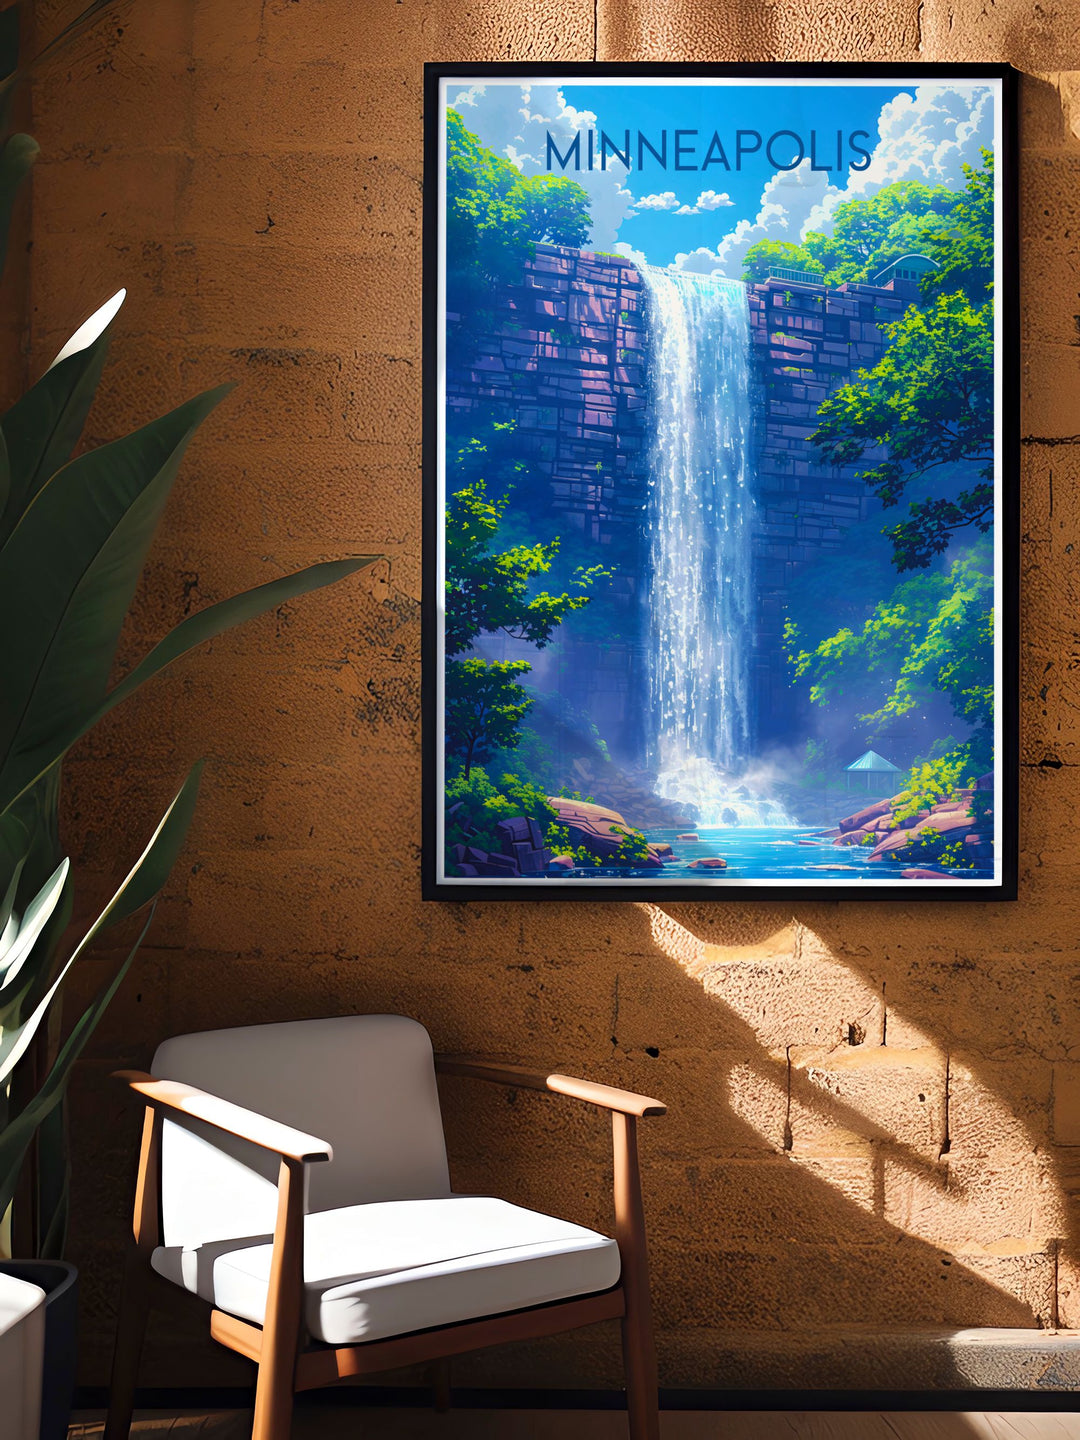 Showcasing the architectural splendor and natural beauty of Minneapolis, this poster captures its urban charm and serene waterfall views, perfect for enhancing your home decor with elegance.